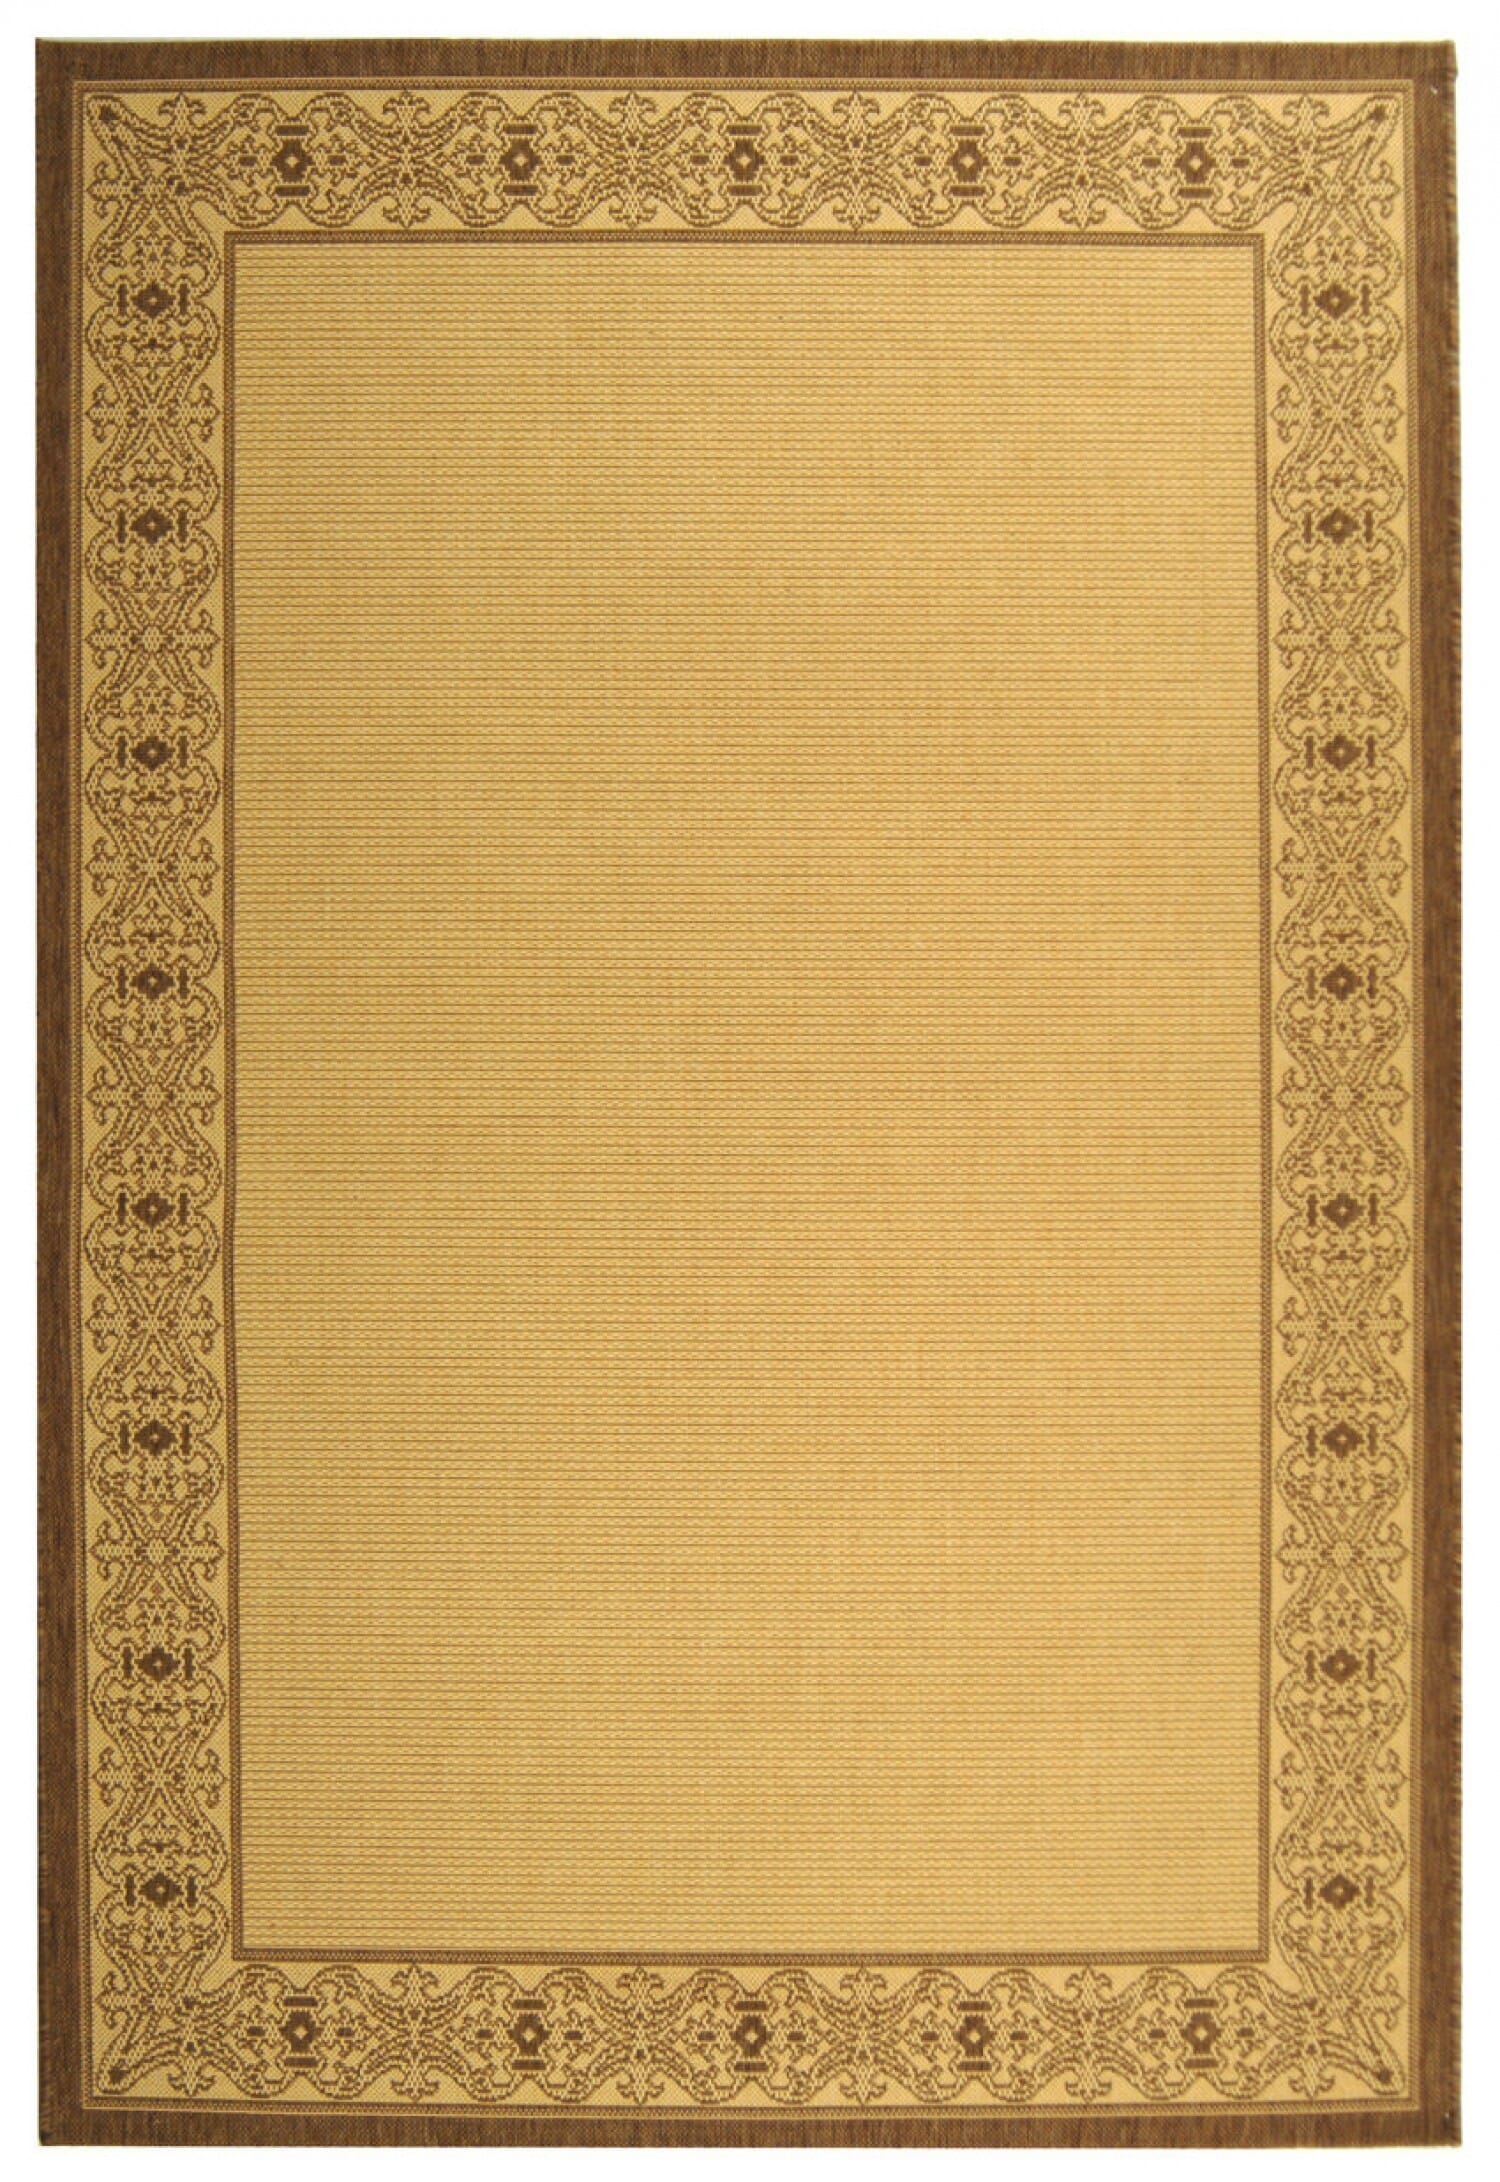 Safavieh Courtyard cy2099-3001 Natural / Brown Bordered Area Rug